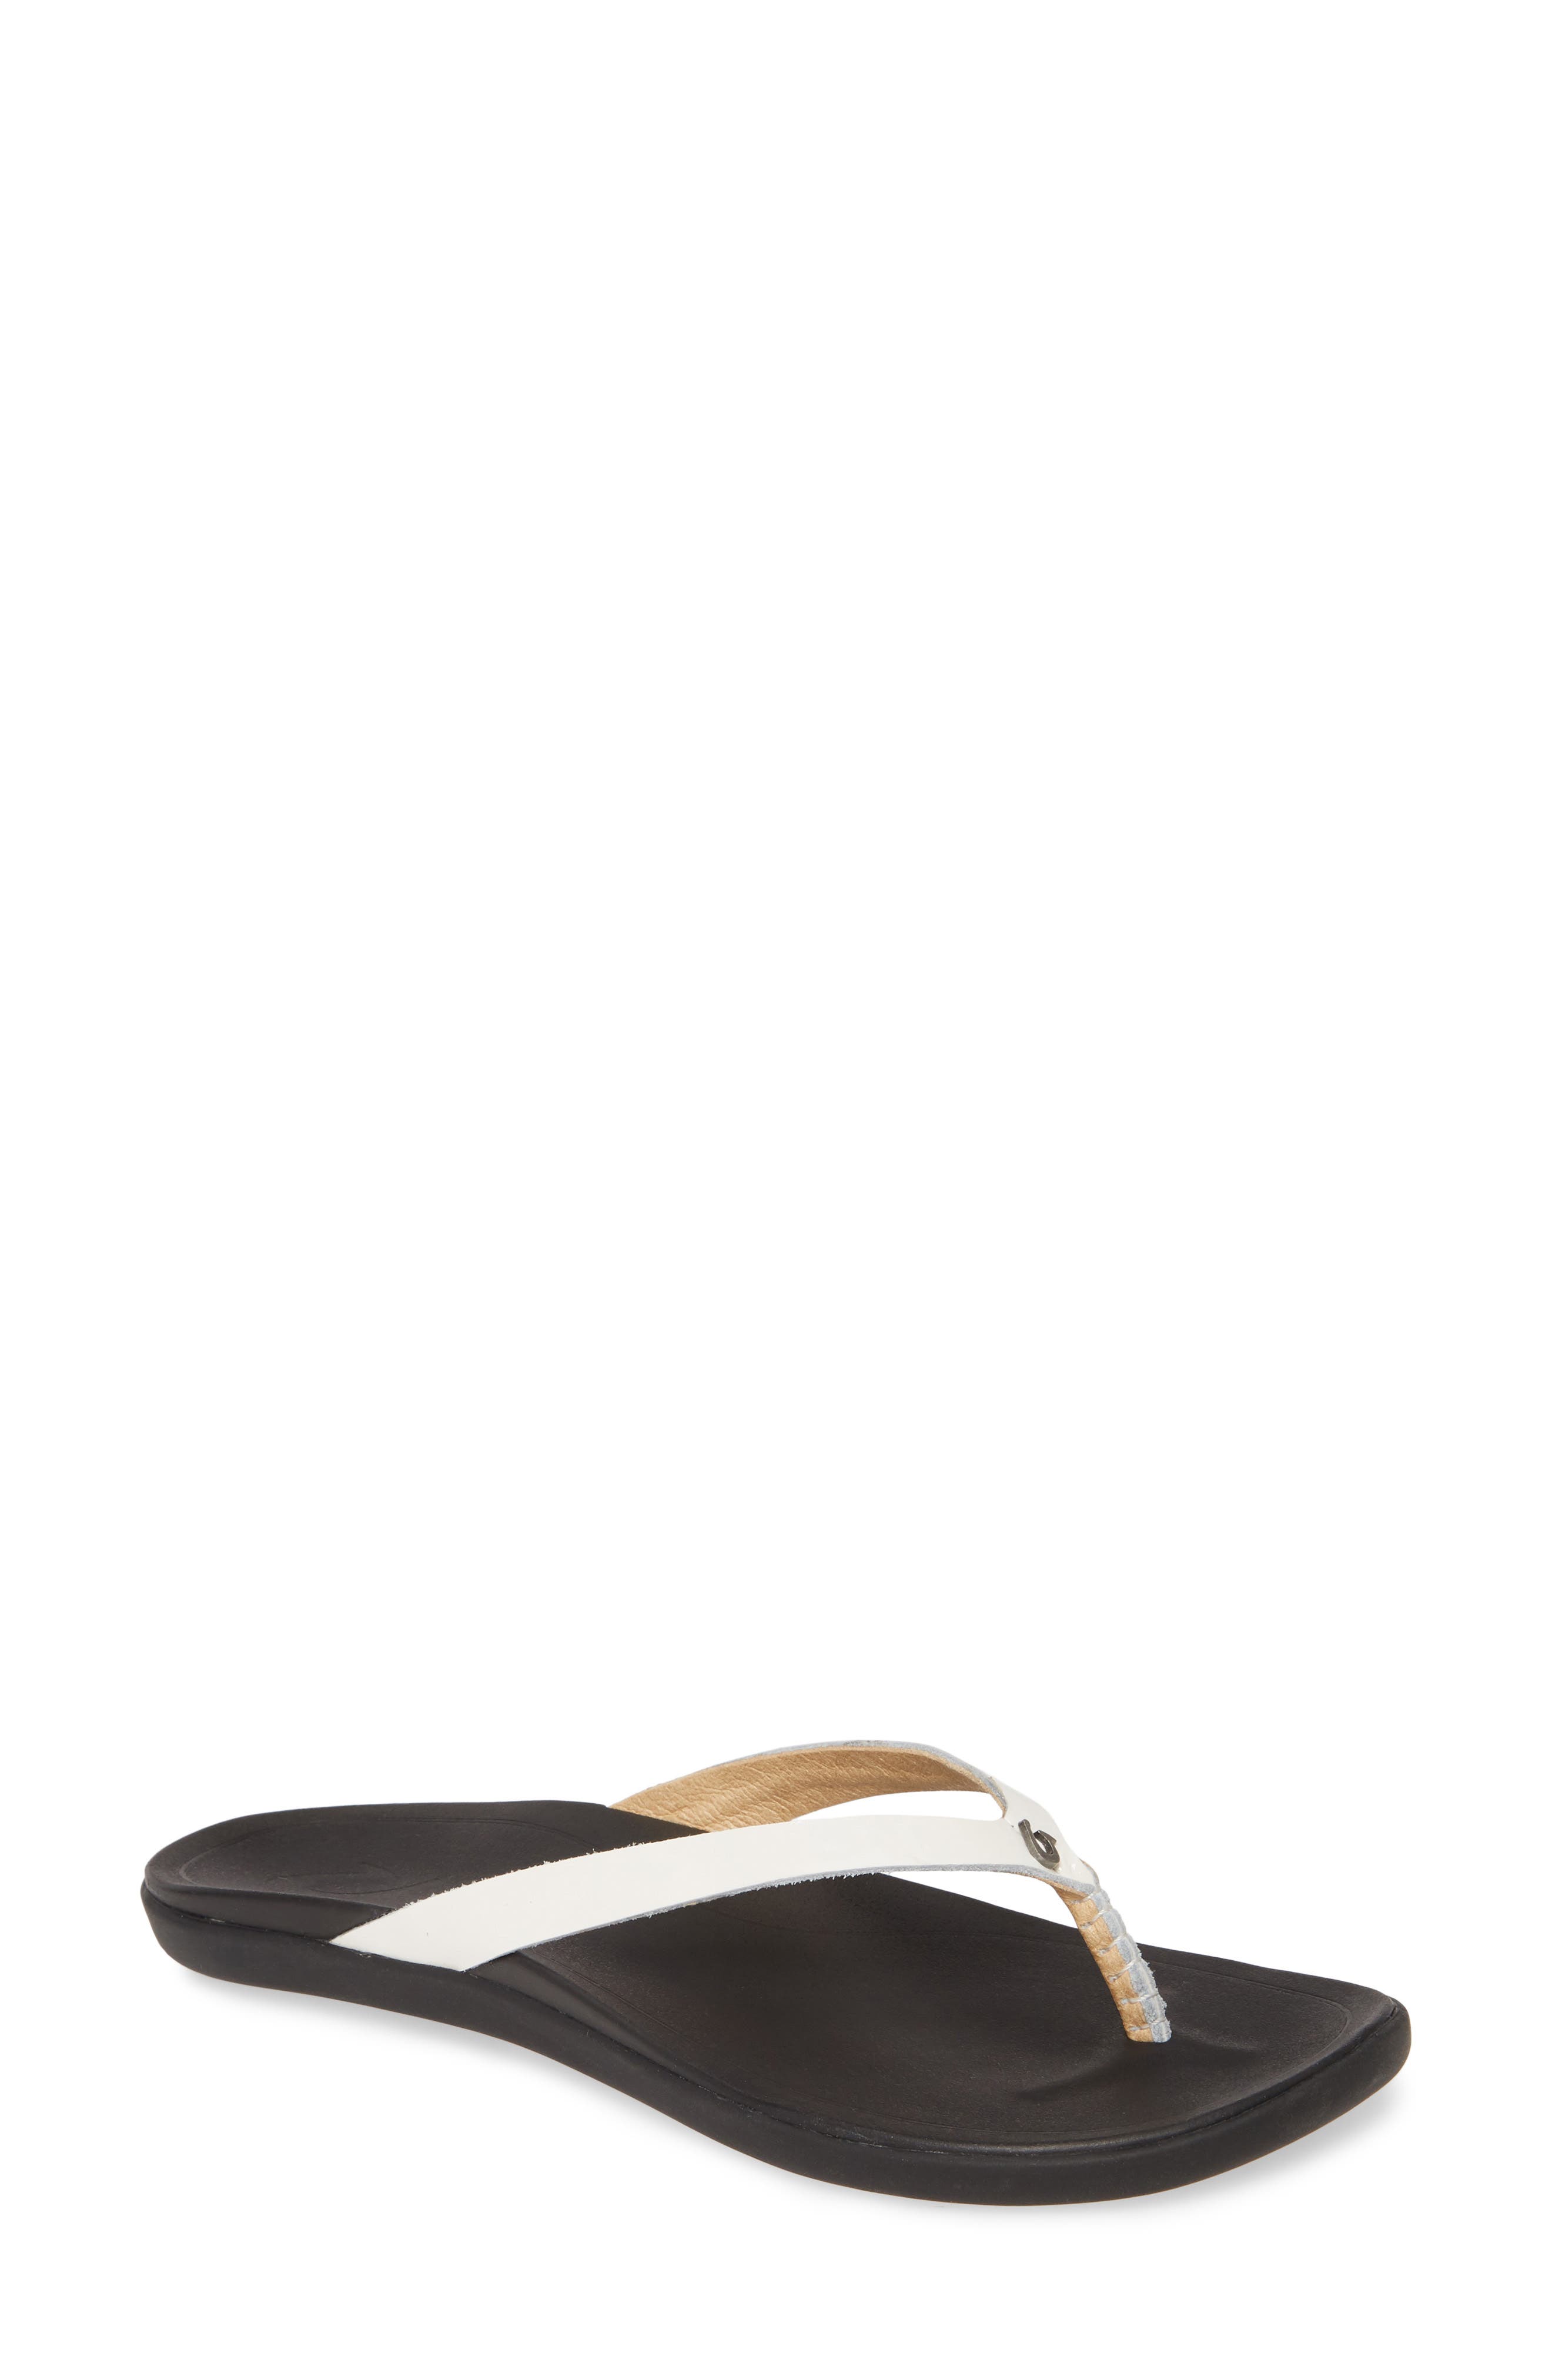 white patent leather flip flops